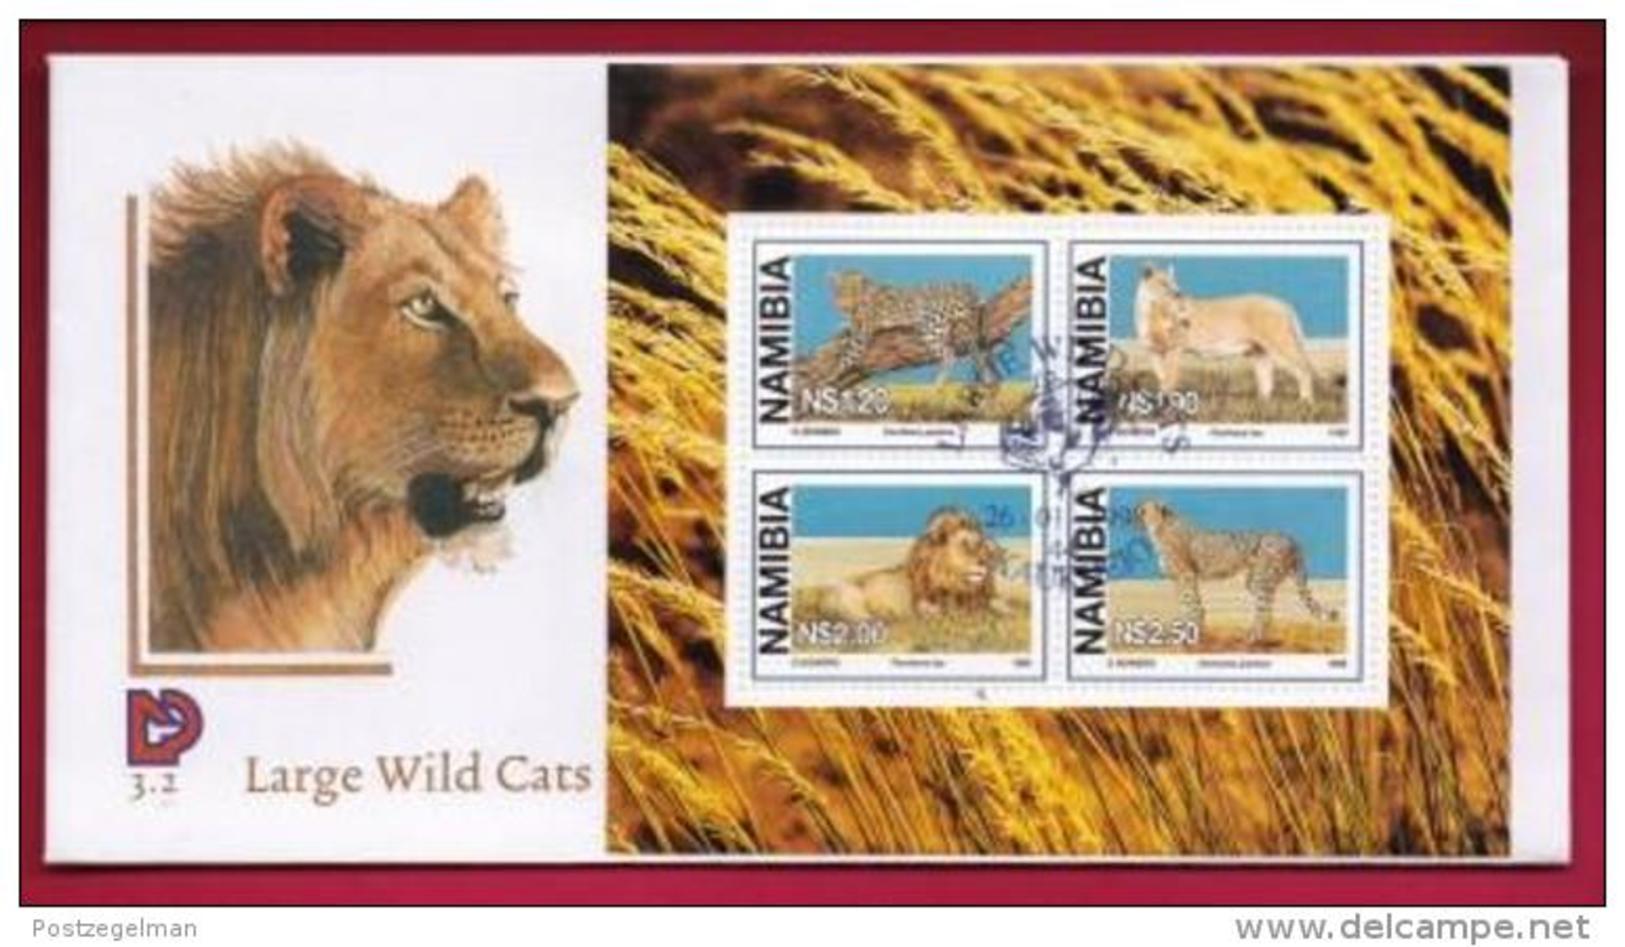 NAMIBIA, 1998, First Day Cover, Large Wild Cats, Min Sheet,Michel 3-02, F3904 - Namibia (1990- ...)